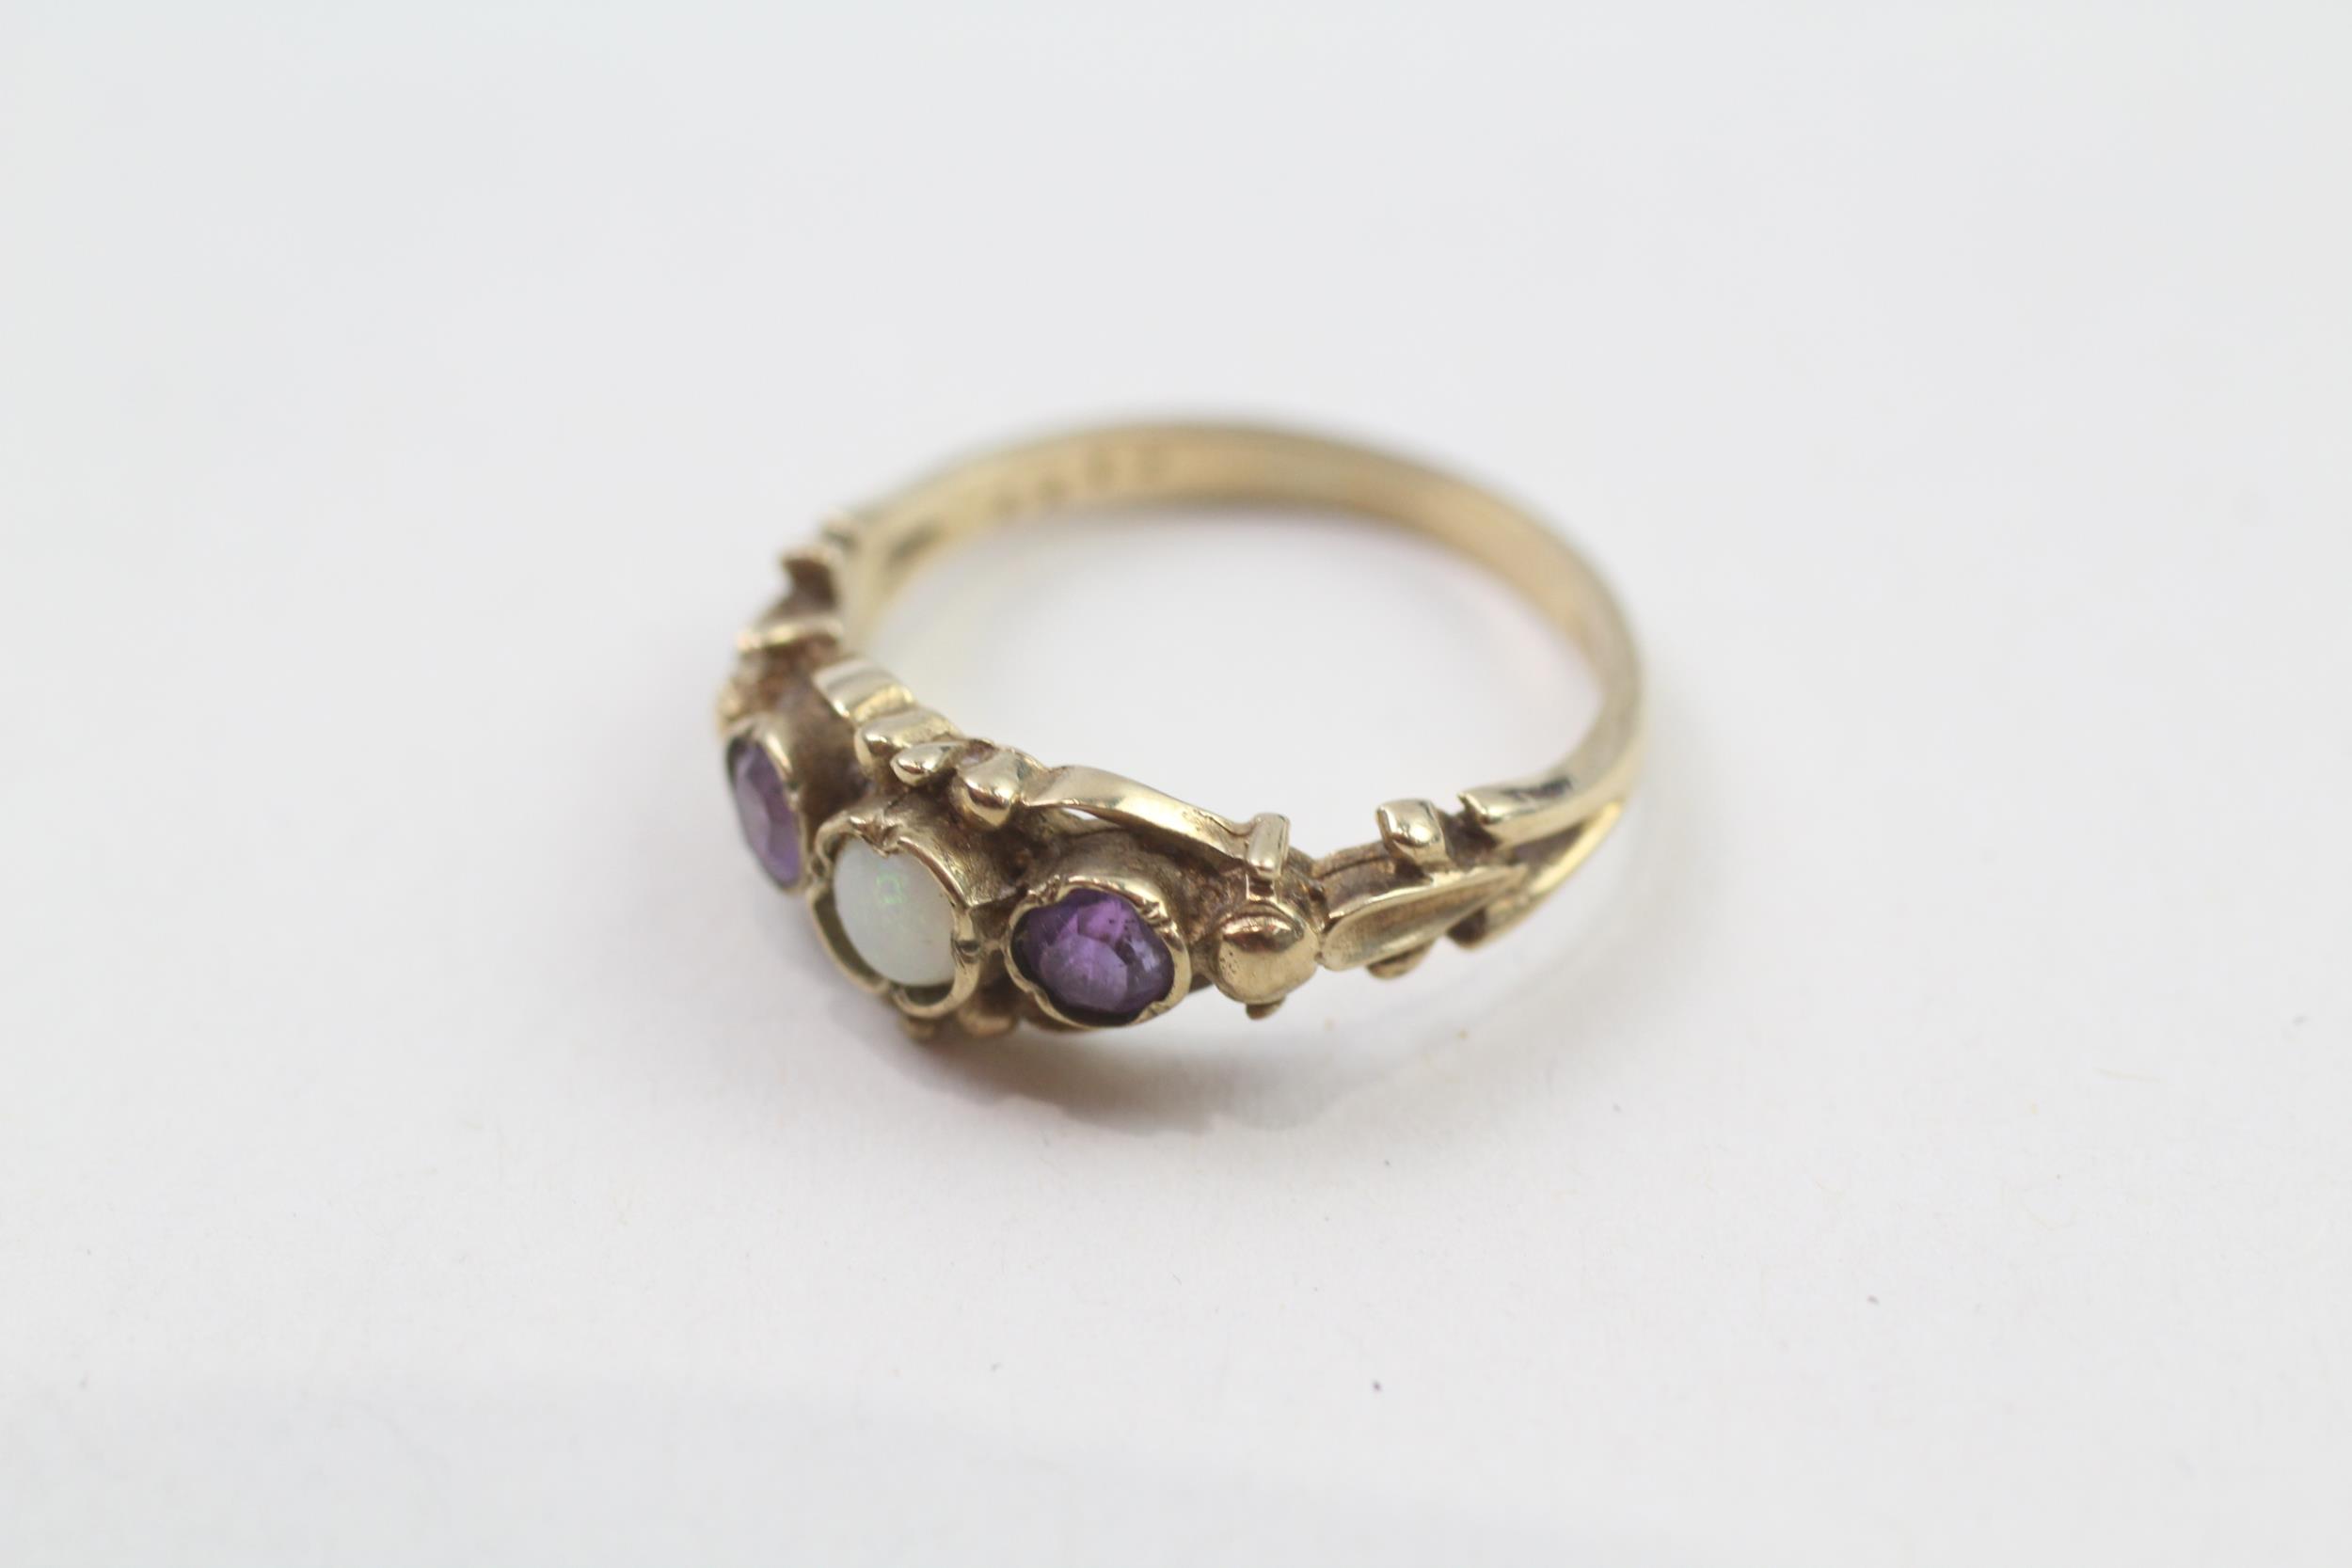 9ct gold vintage amethyst & opal three stone ring with patterned shoulders (2.3g) Size M - Image 2 of 4